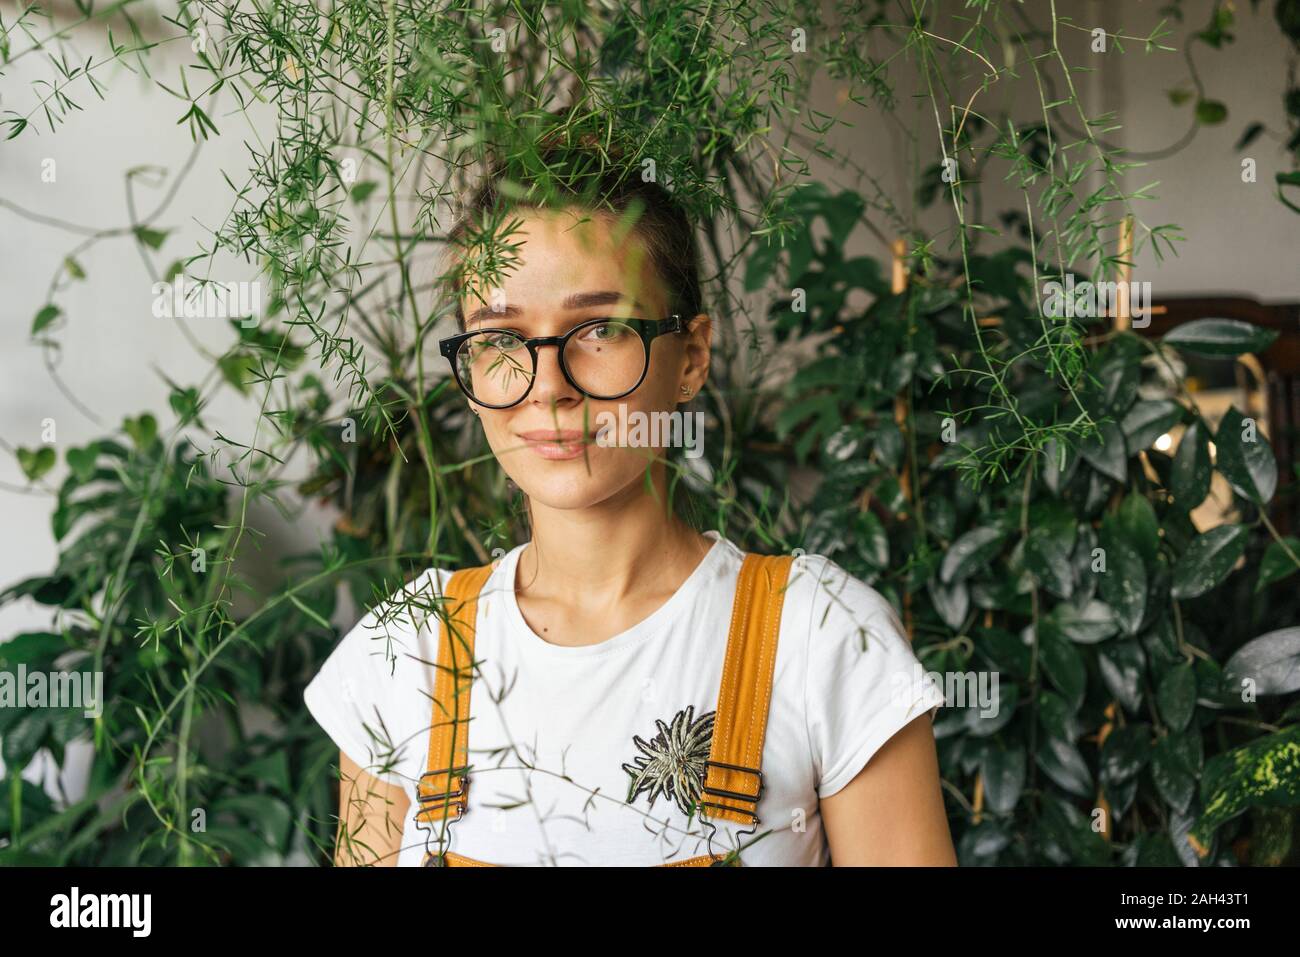 Portrait of a young woman surrounded by plants Stock Photo